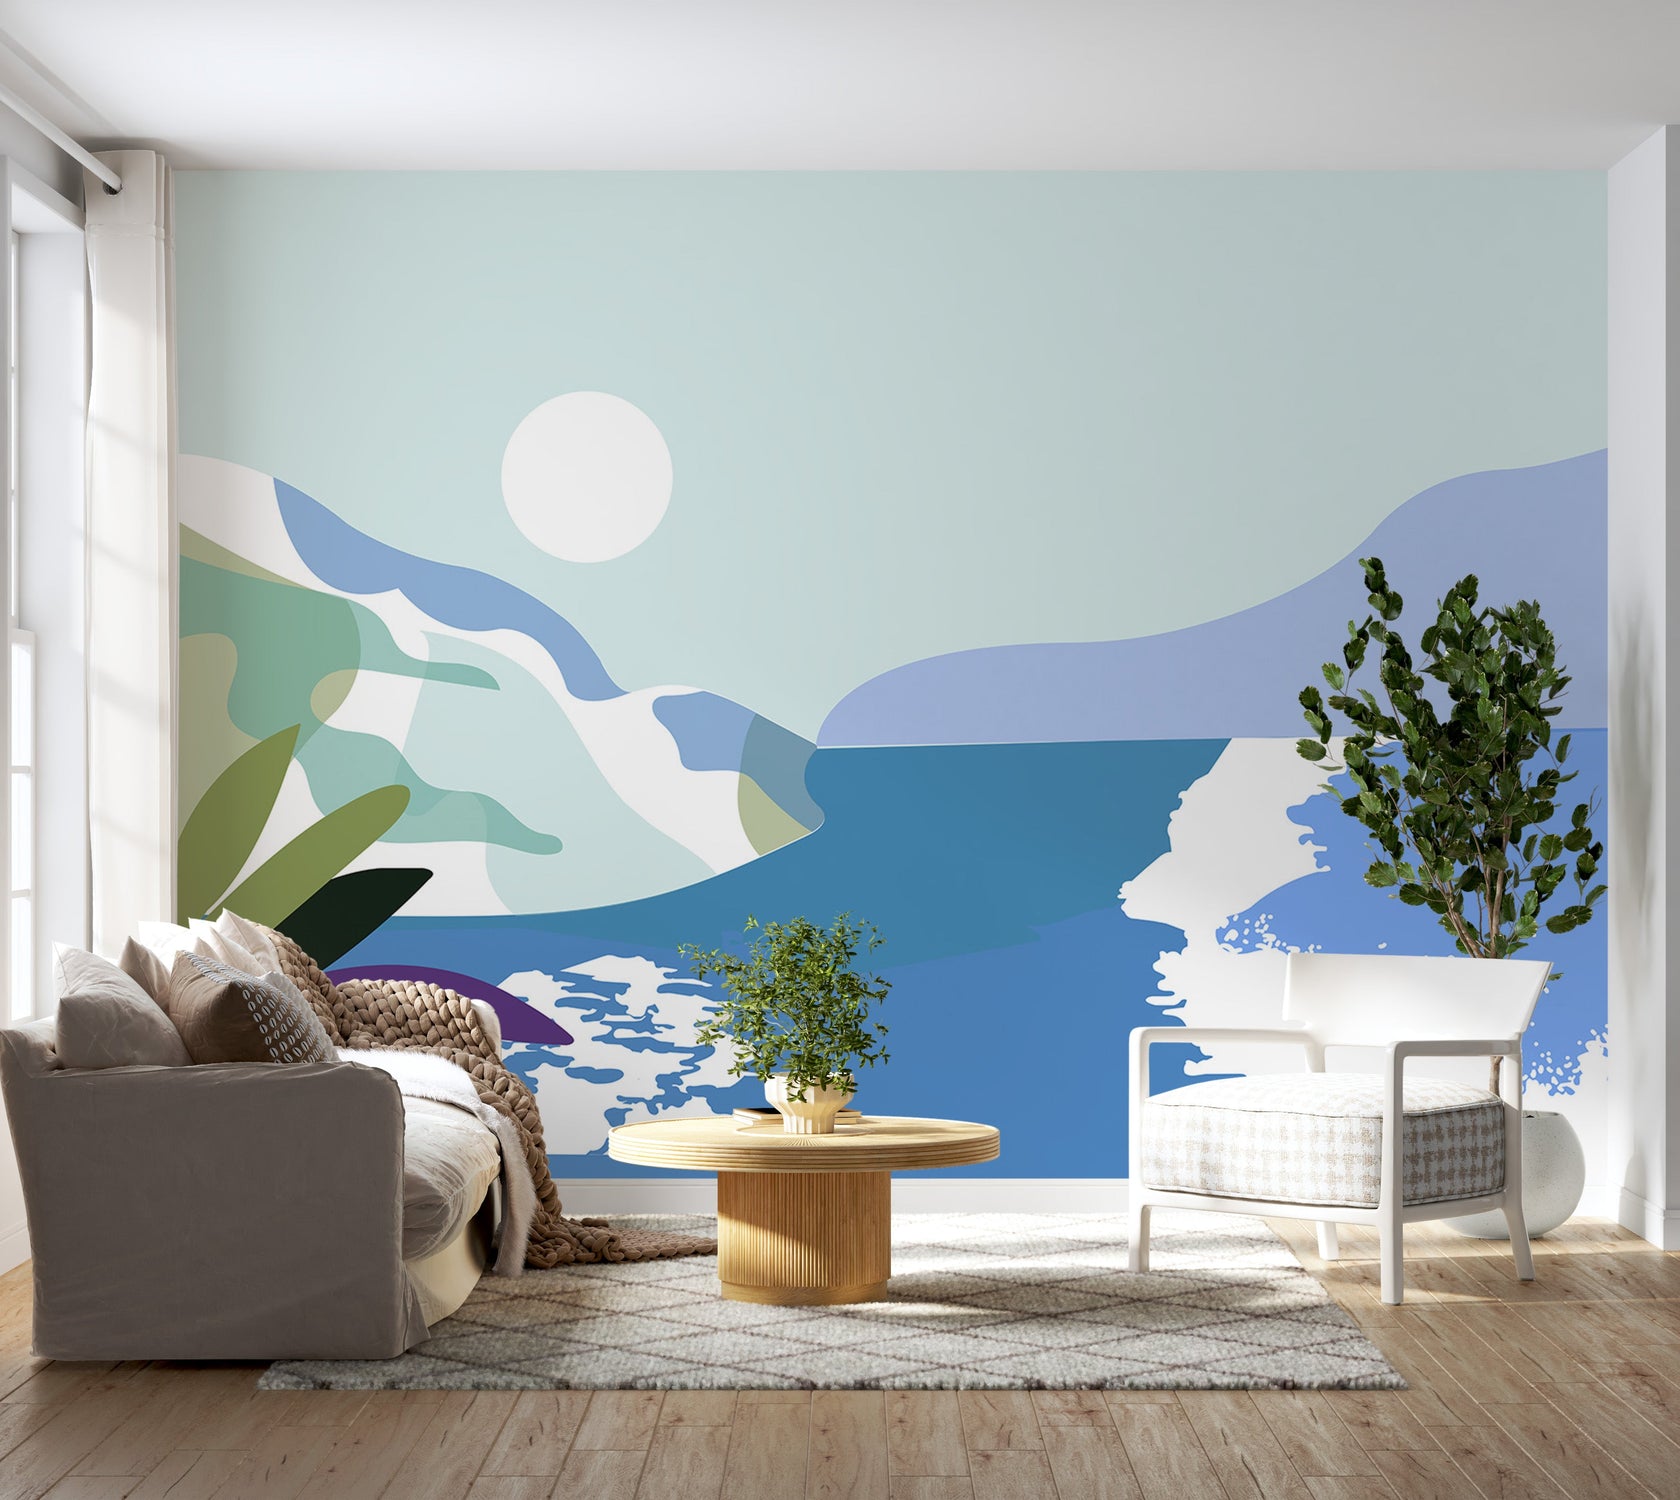 Peel & Stick Abstract Wall Mural - Modern Sea & Mountains - Removable Wall Decals-Tiptophomedecor